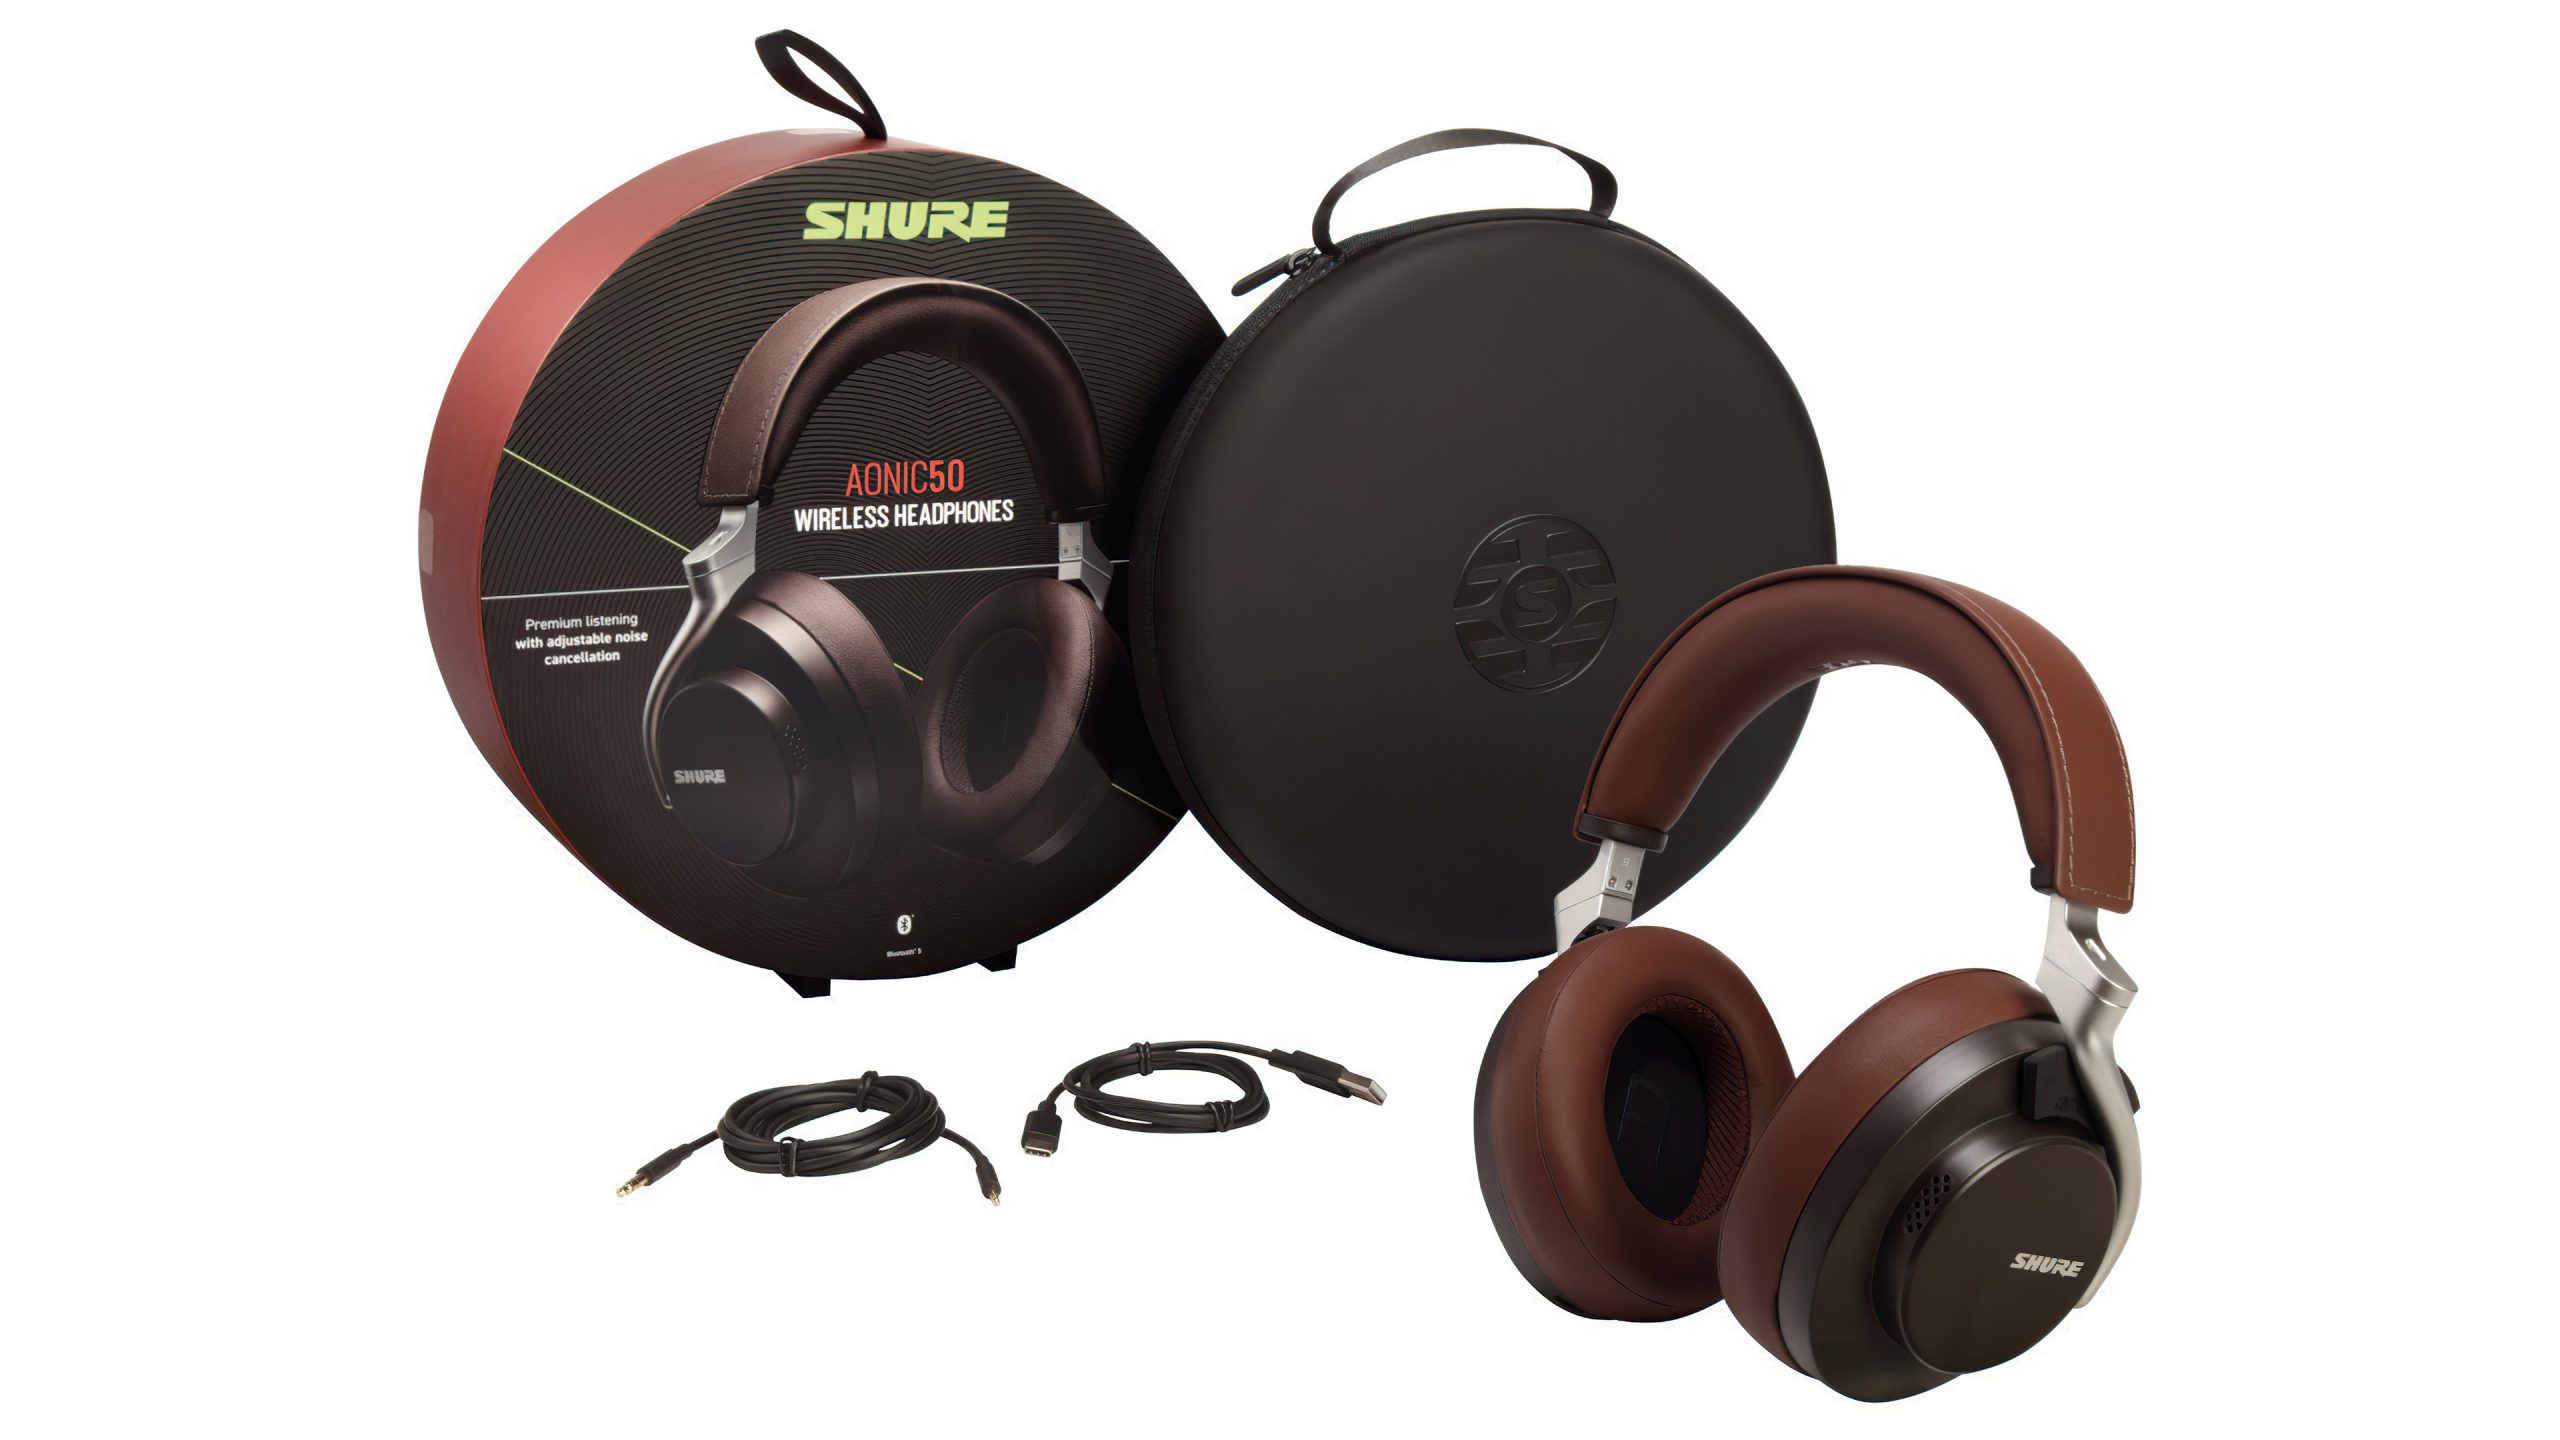 Shure Aonic 50 Review - Silencers with proper sound